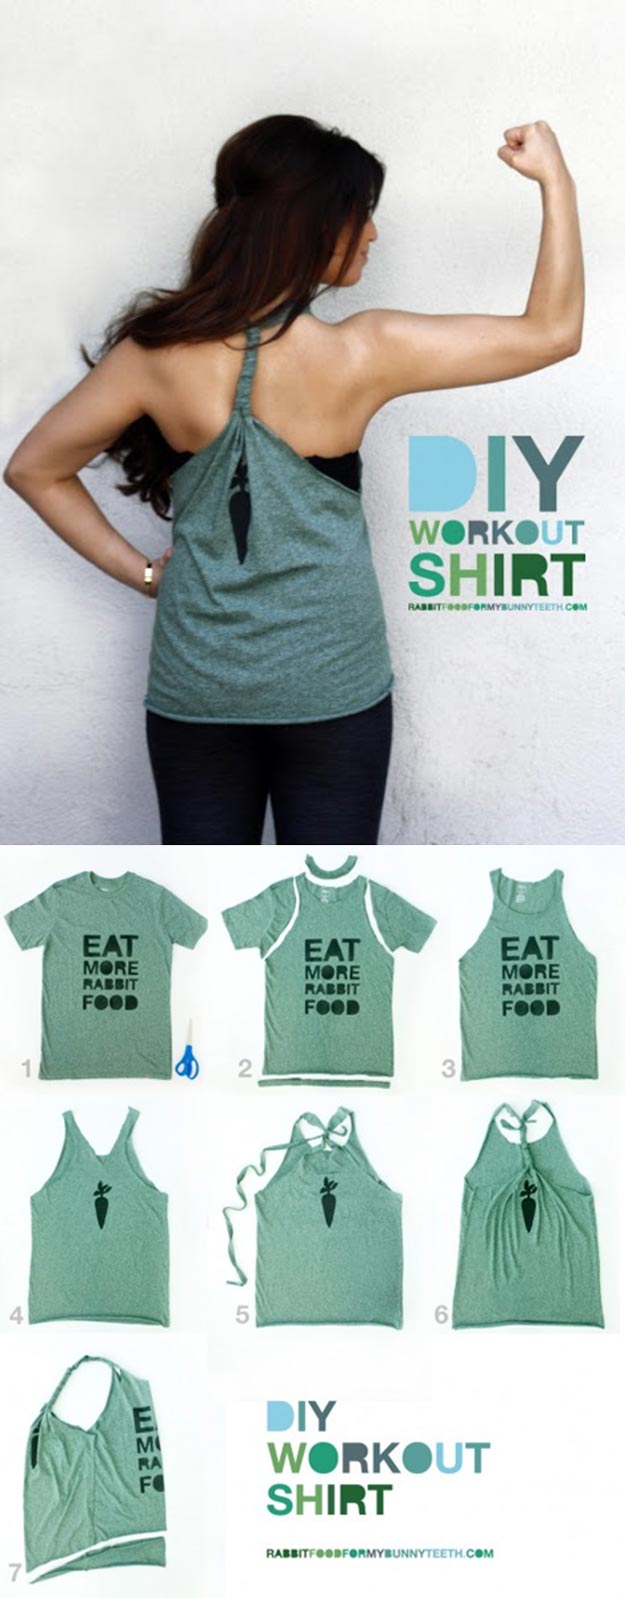 Uses for Old Tshirts, Tees - DIY Workout Tank - Tshirt Crafts - How to Recycle Old Tshirts into New Clothes - Cheap and Easy Crafts to Make at Home - Cute, Easy, Cheap Craft Ideas for Kids, Teens, Adults - Handmade Craft Ideas Step by Step - Crafts to Do with Nothing #teencrafts #cheapcrafts